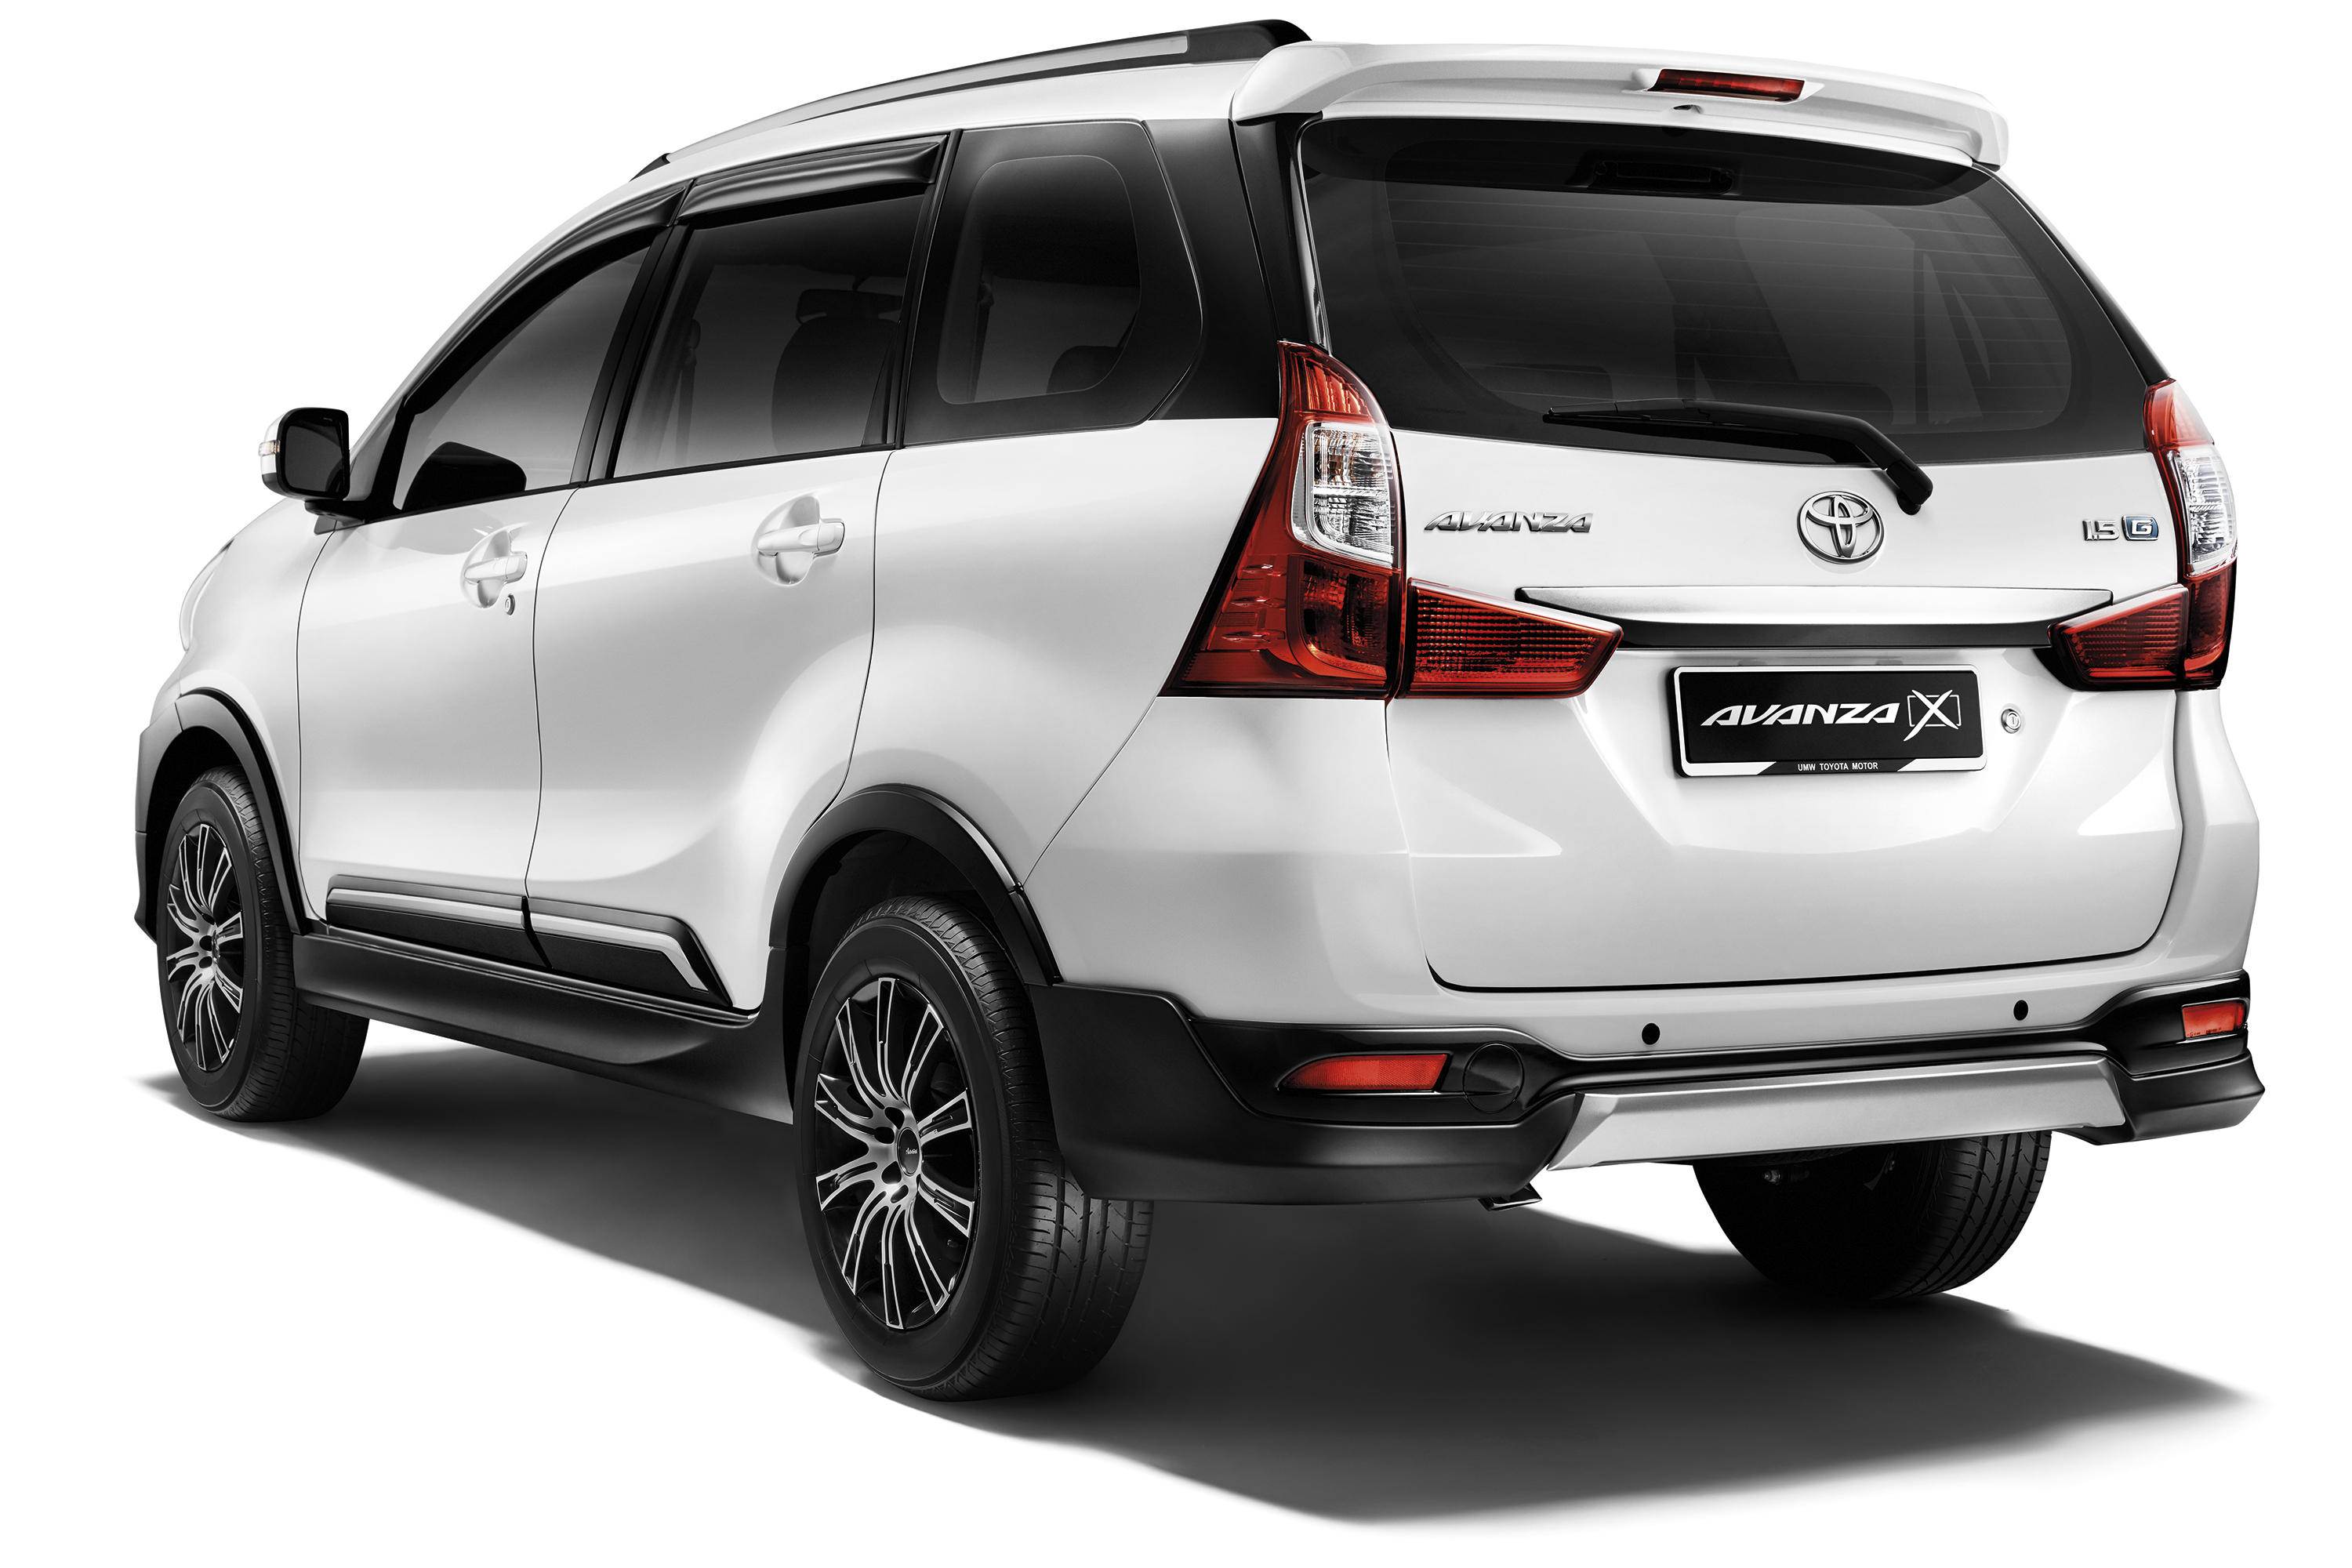 UMW Toyota Introduces Upgraded Avanza 1.5X  News and reviews on